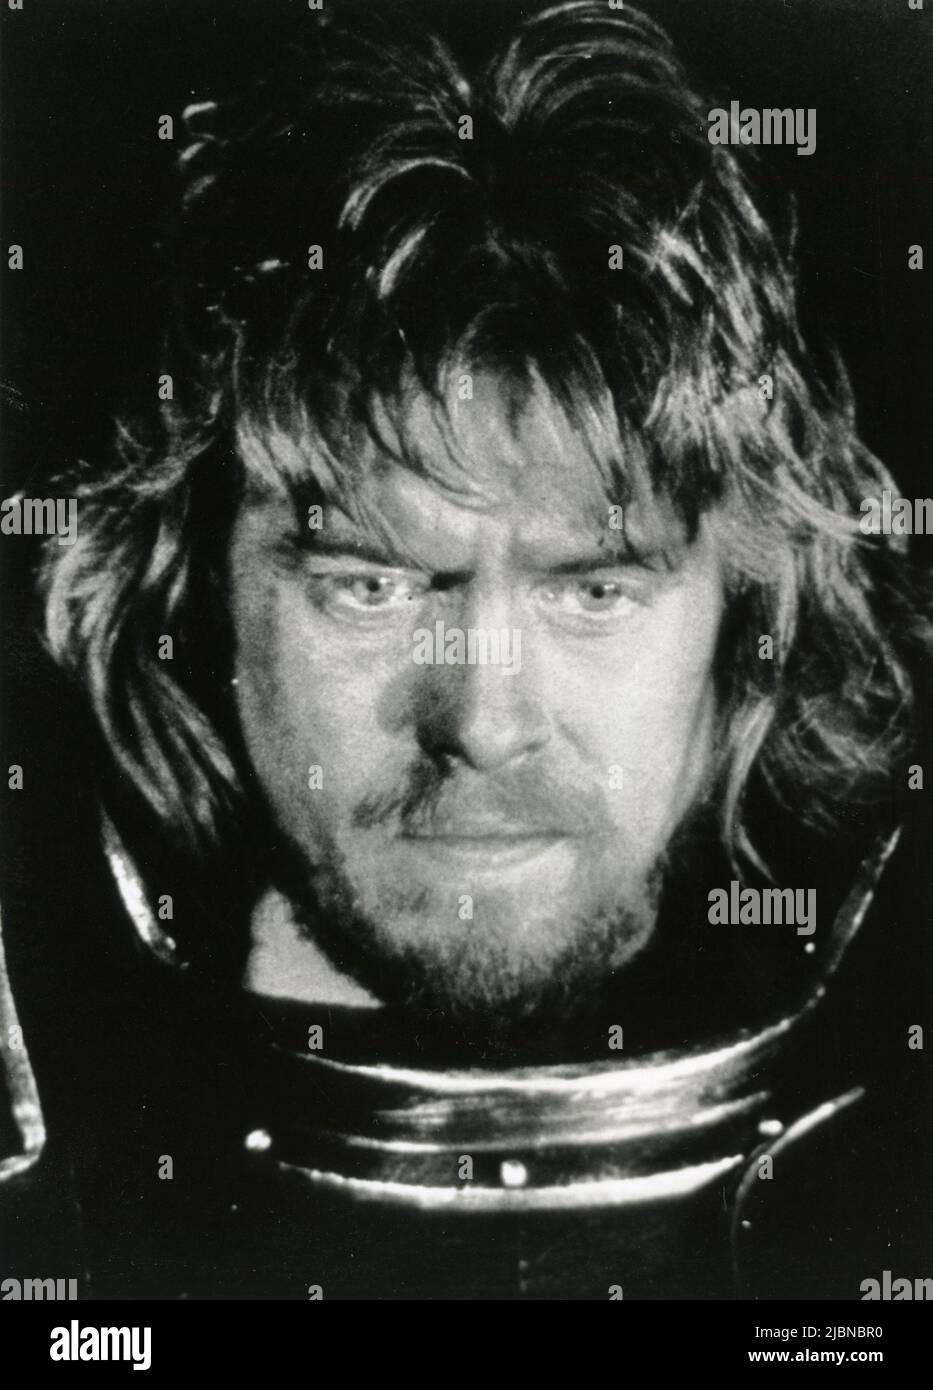 English actor Nigel Terry in the movie Excalibur, UK 1981 Stock Photo